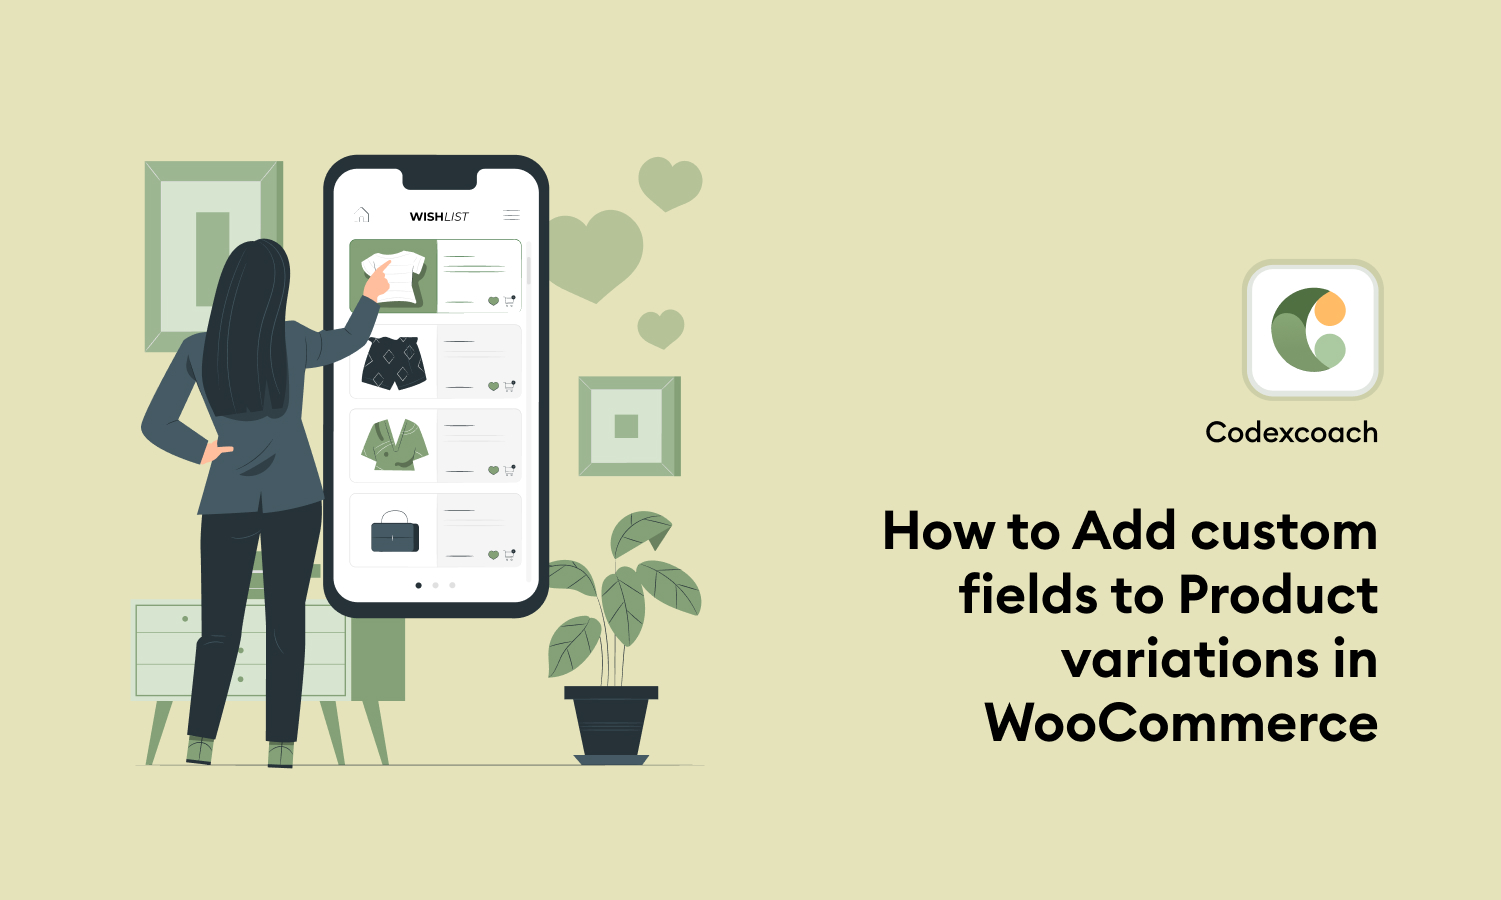 How-to-Add-custom-fields-to-Product-variations-in-WooCommerce